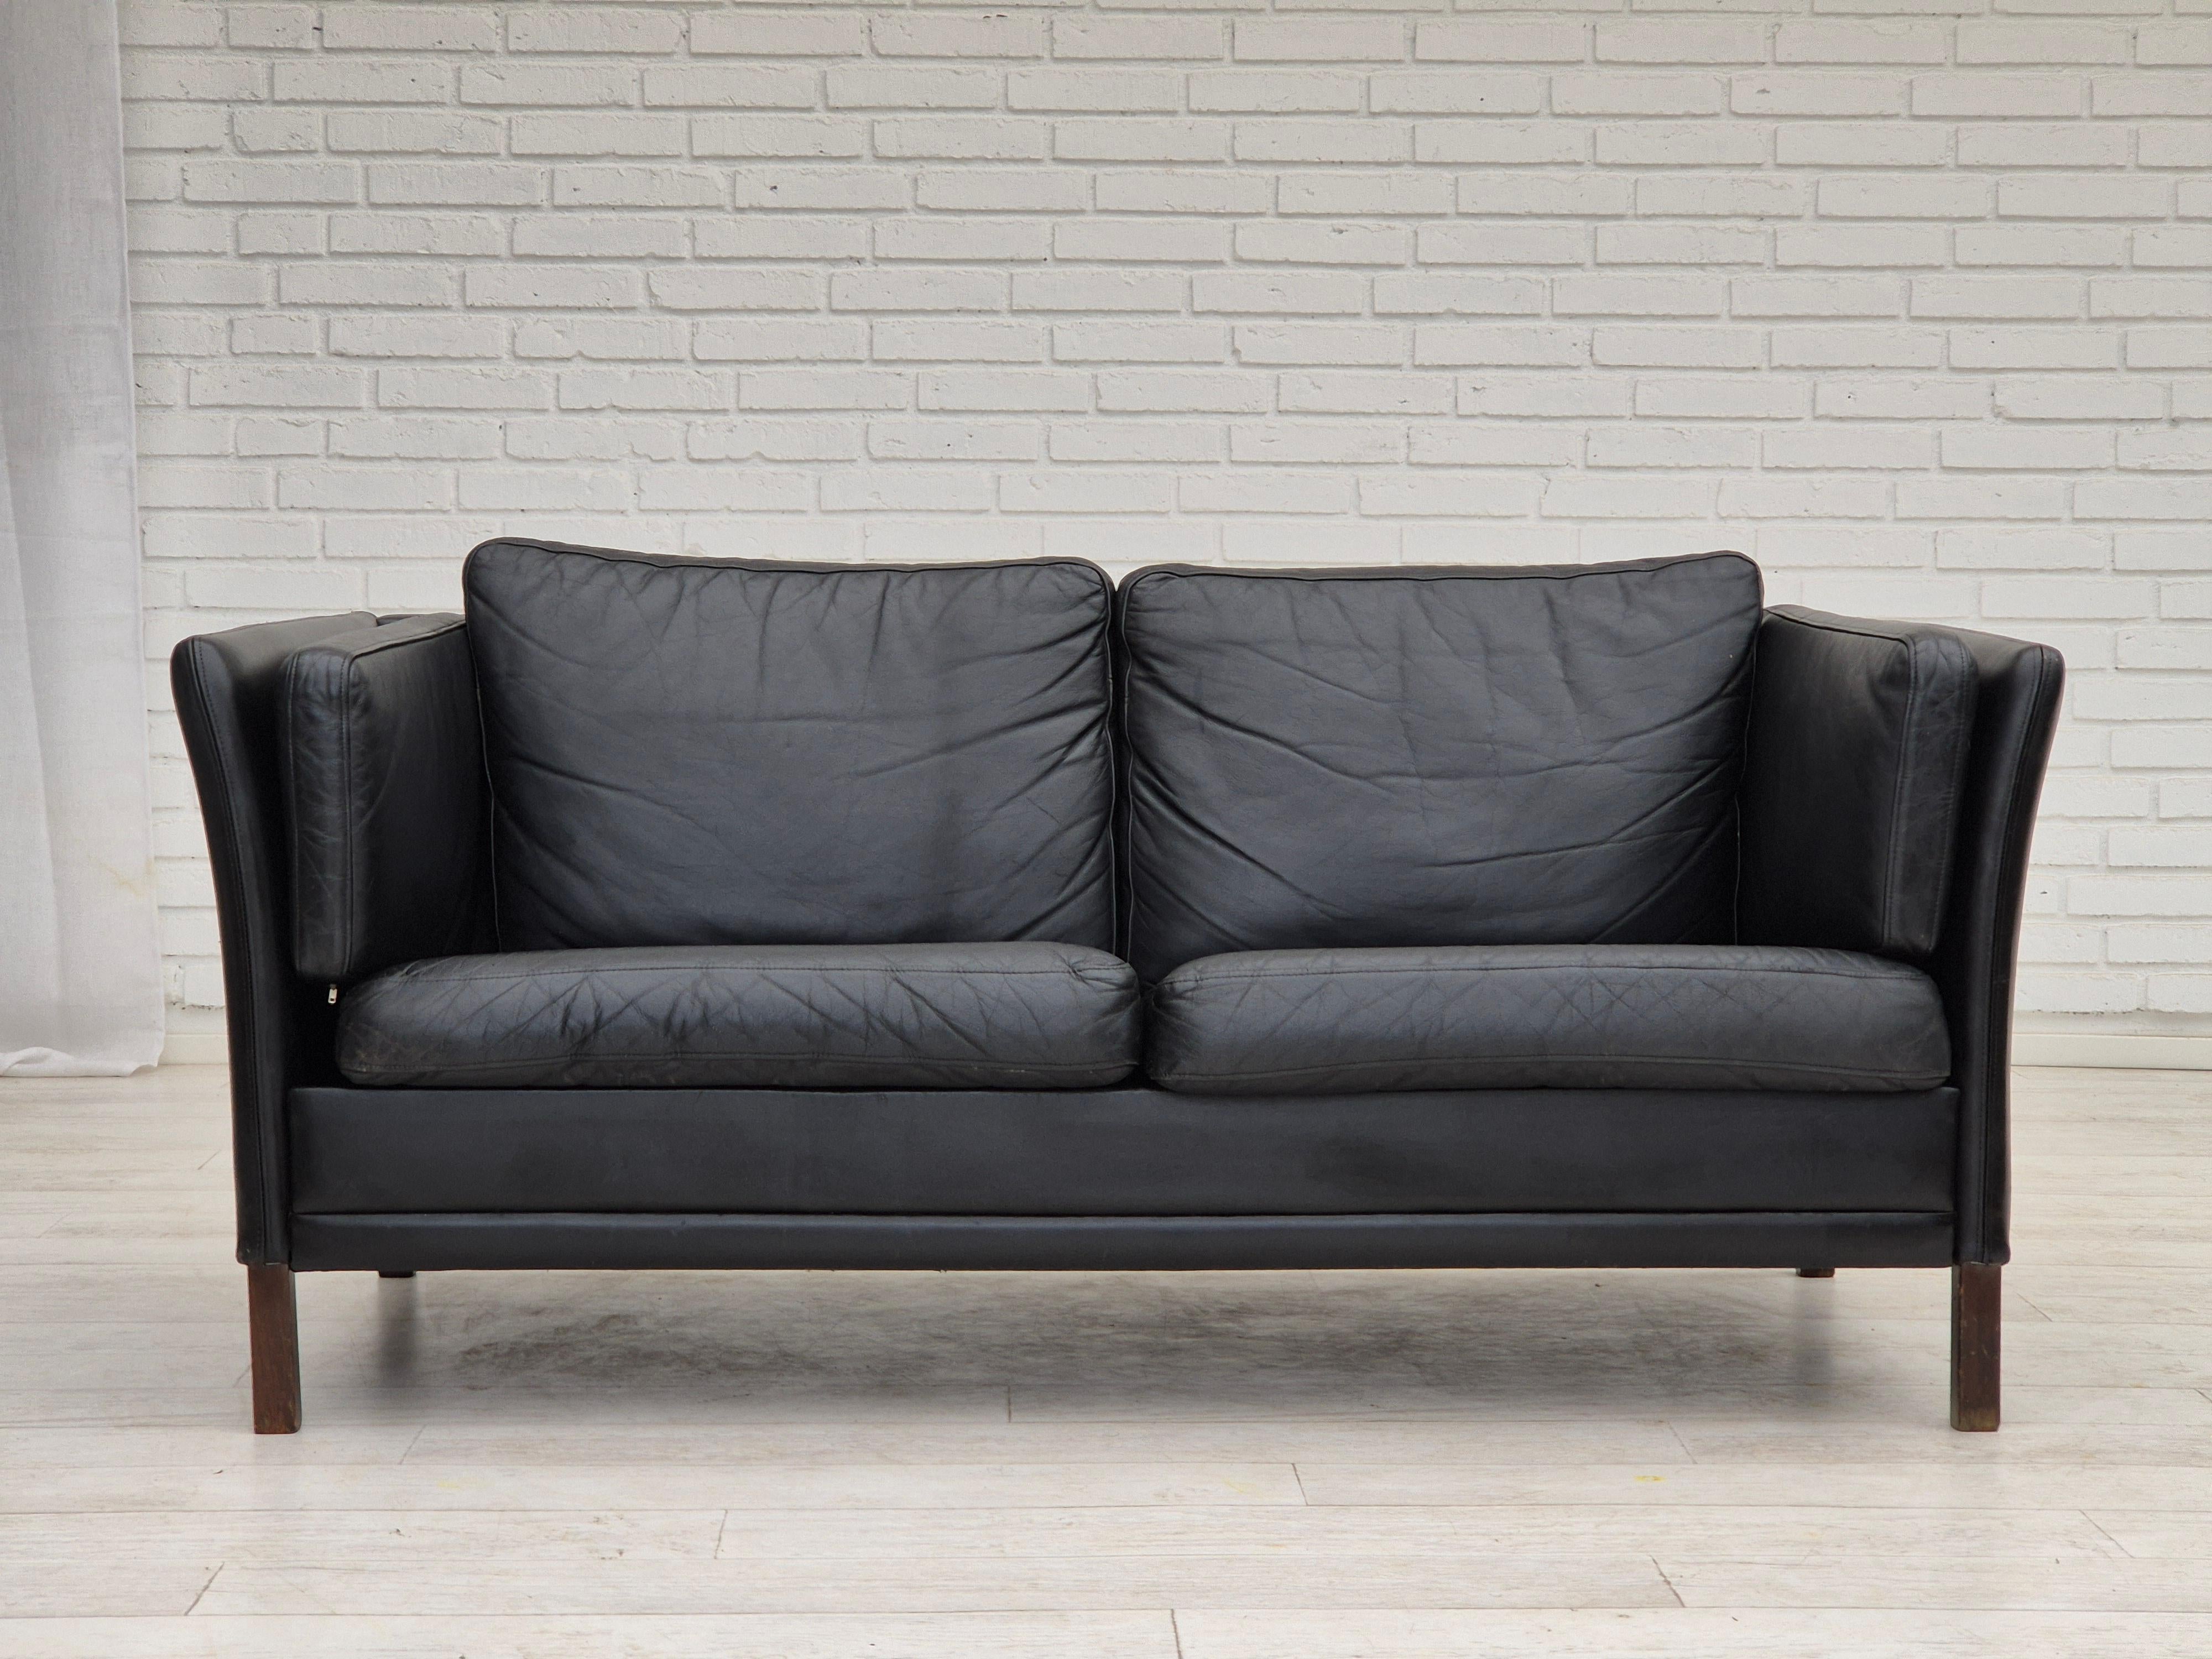 1960s, Danish design by Mogens Hansen. 2 seater sofa in original very good condition: no smells and no stains. Black leather, ash wood legs. Manufactured by Danish furniture manufacturer in about 1960-65s.